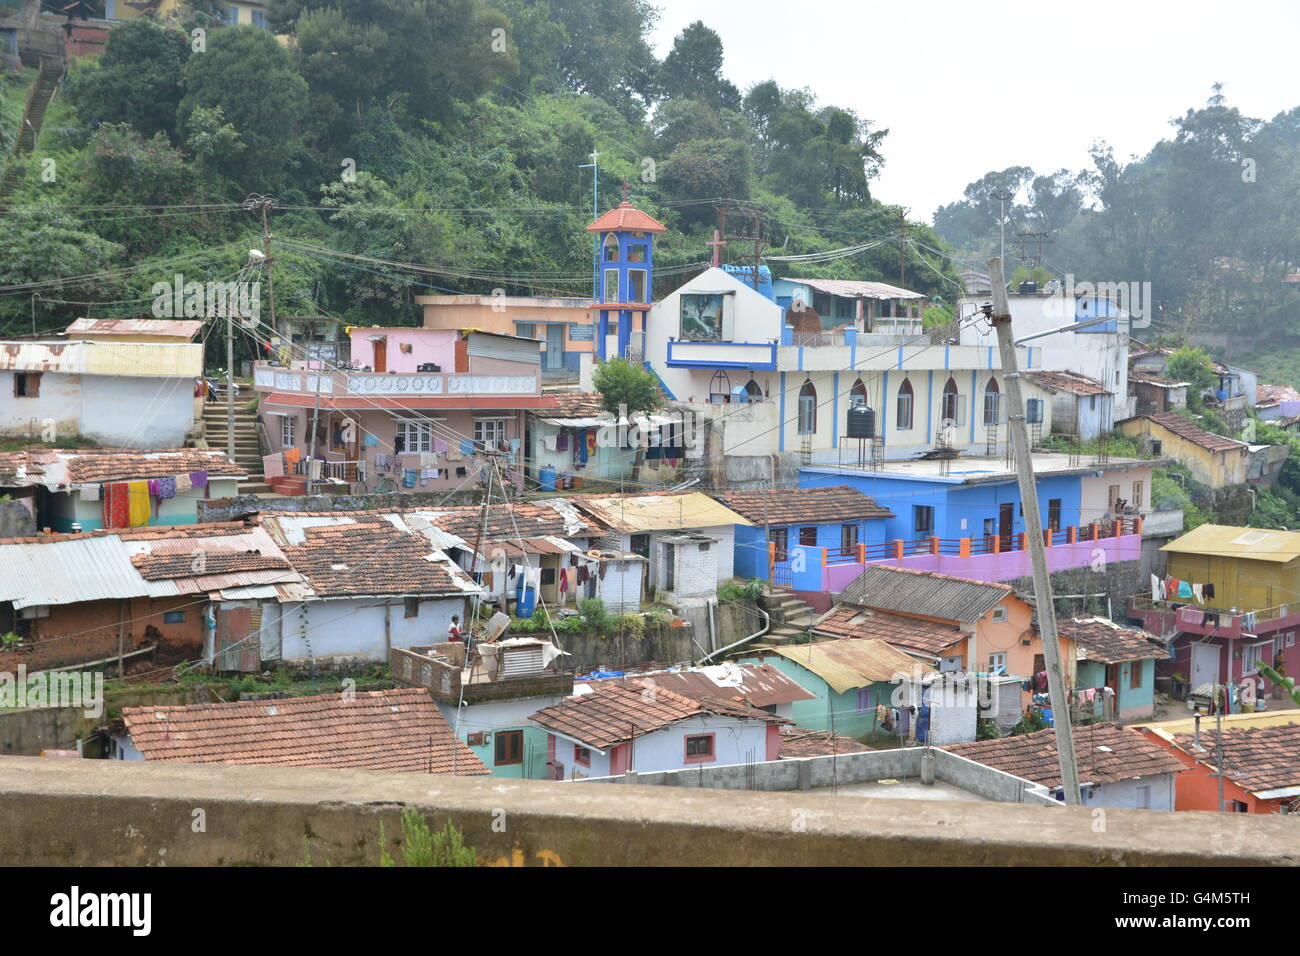 Coonoor, India - October 30, 2015 - View on slum in Coonor, Nilgri Mountains Stock Photo